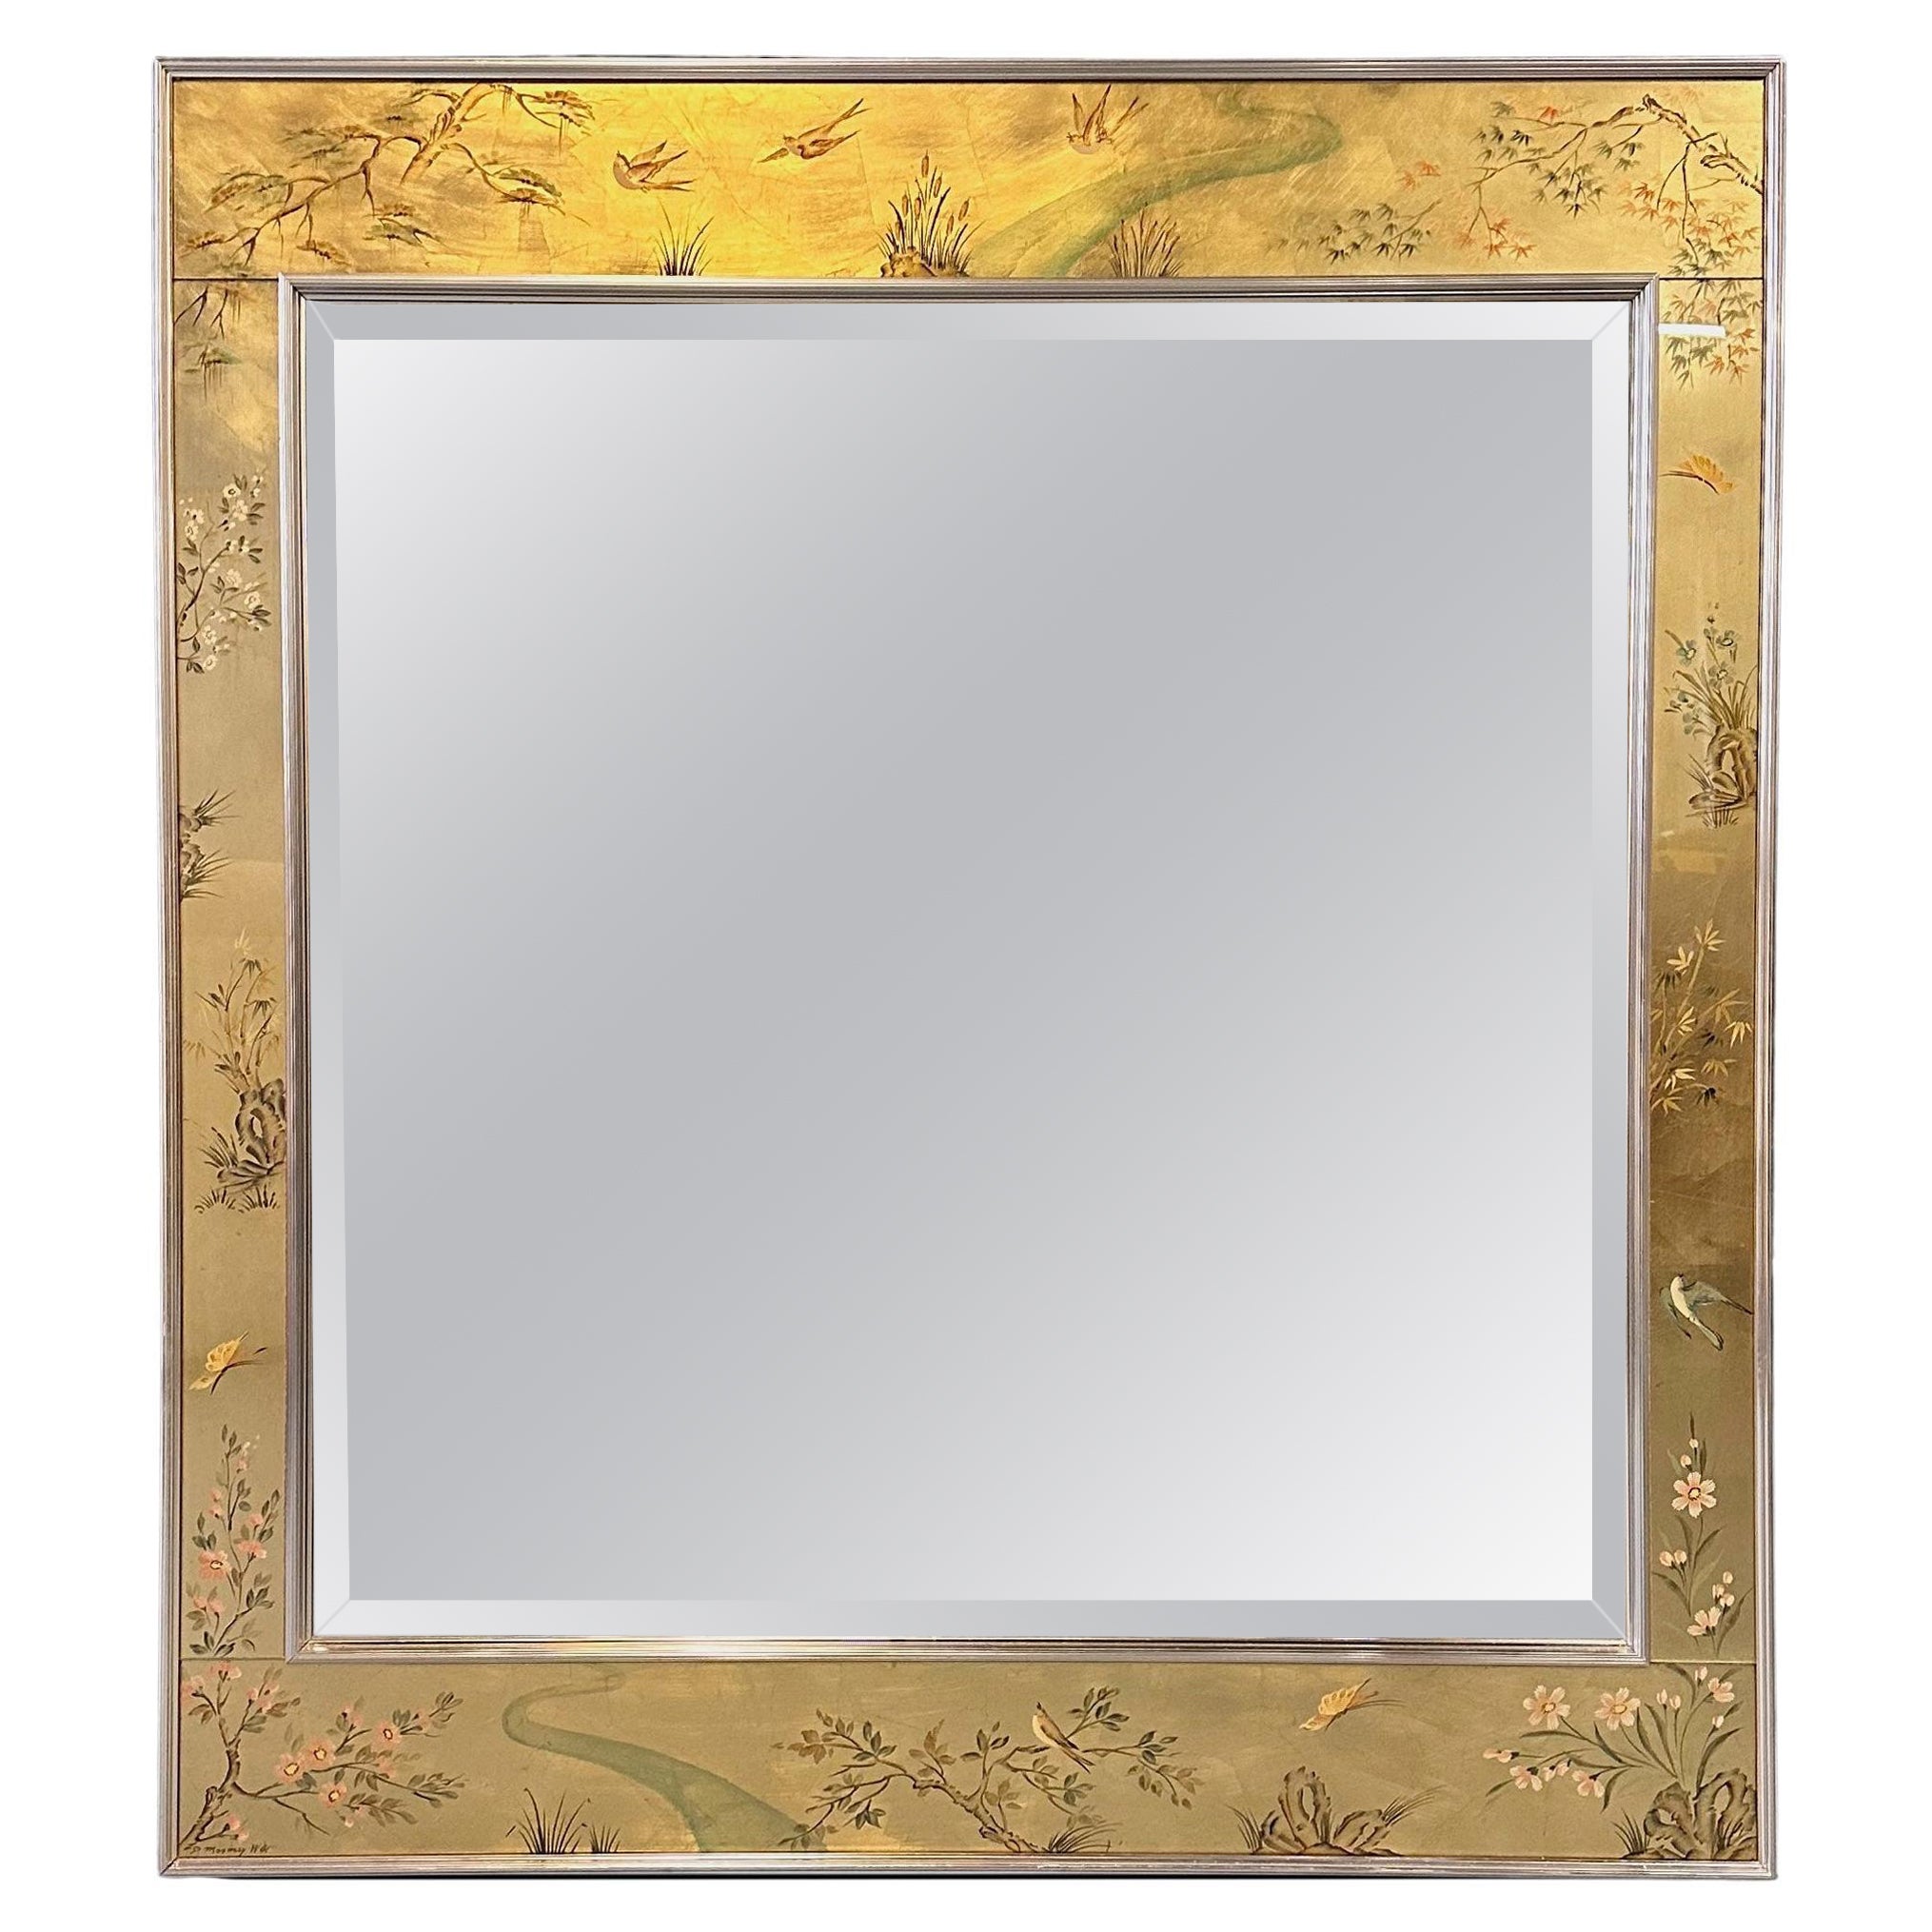 La Barge Square Eglomise Wall Mirror with Chinoiserie Natural Scene Mid Century